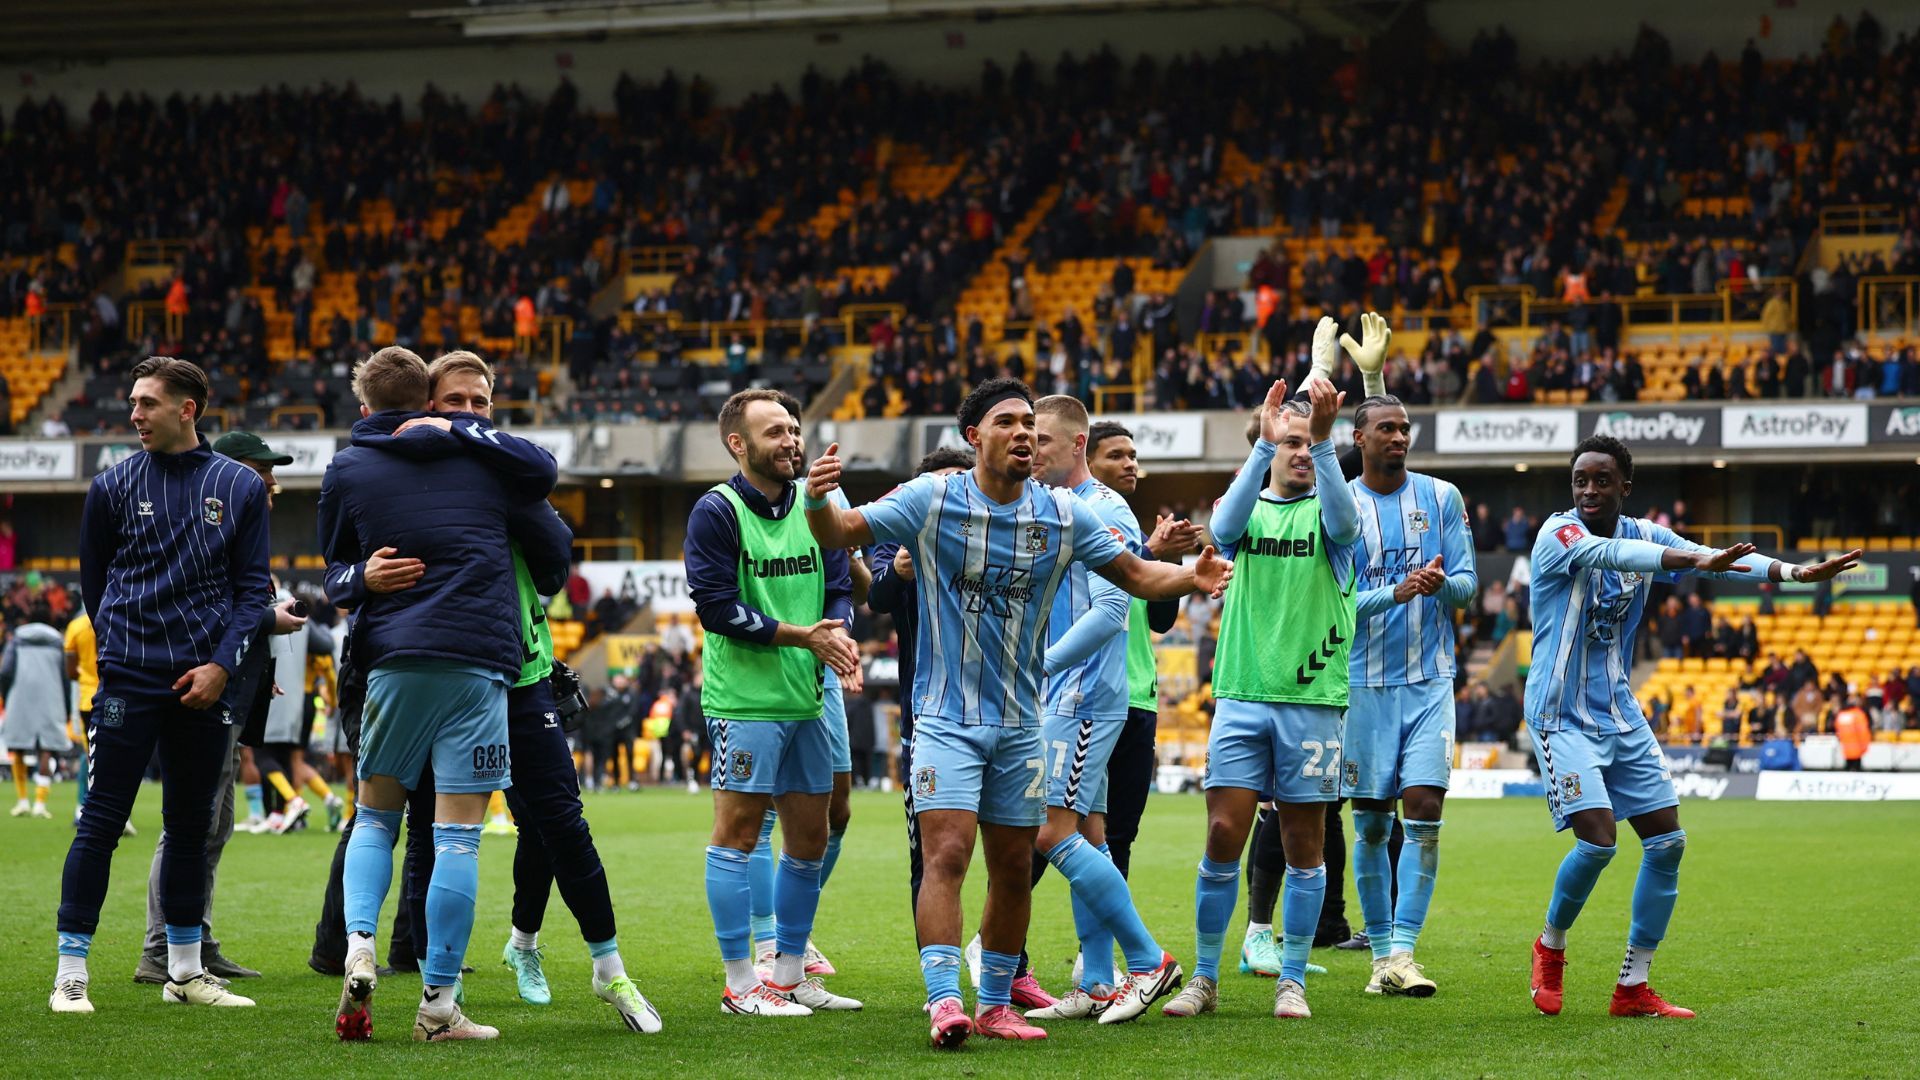 Wolves 2-3 Coventry City